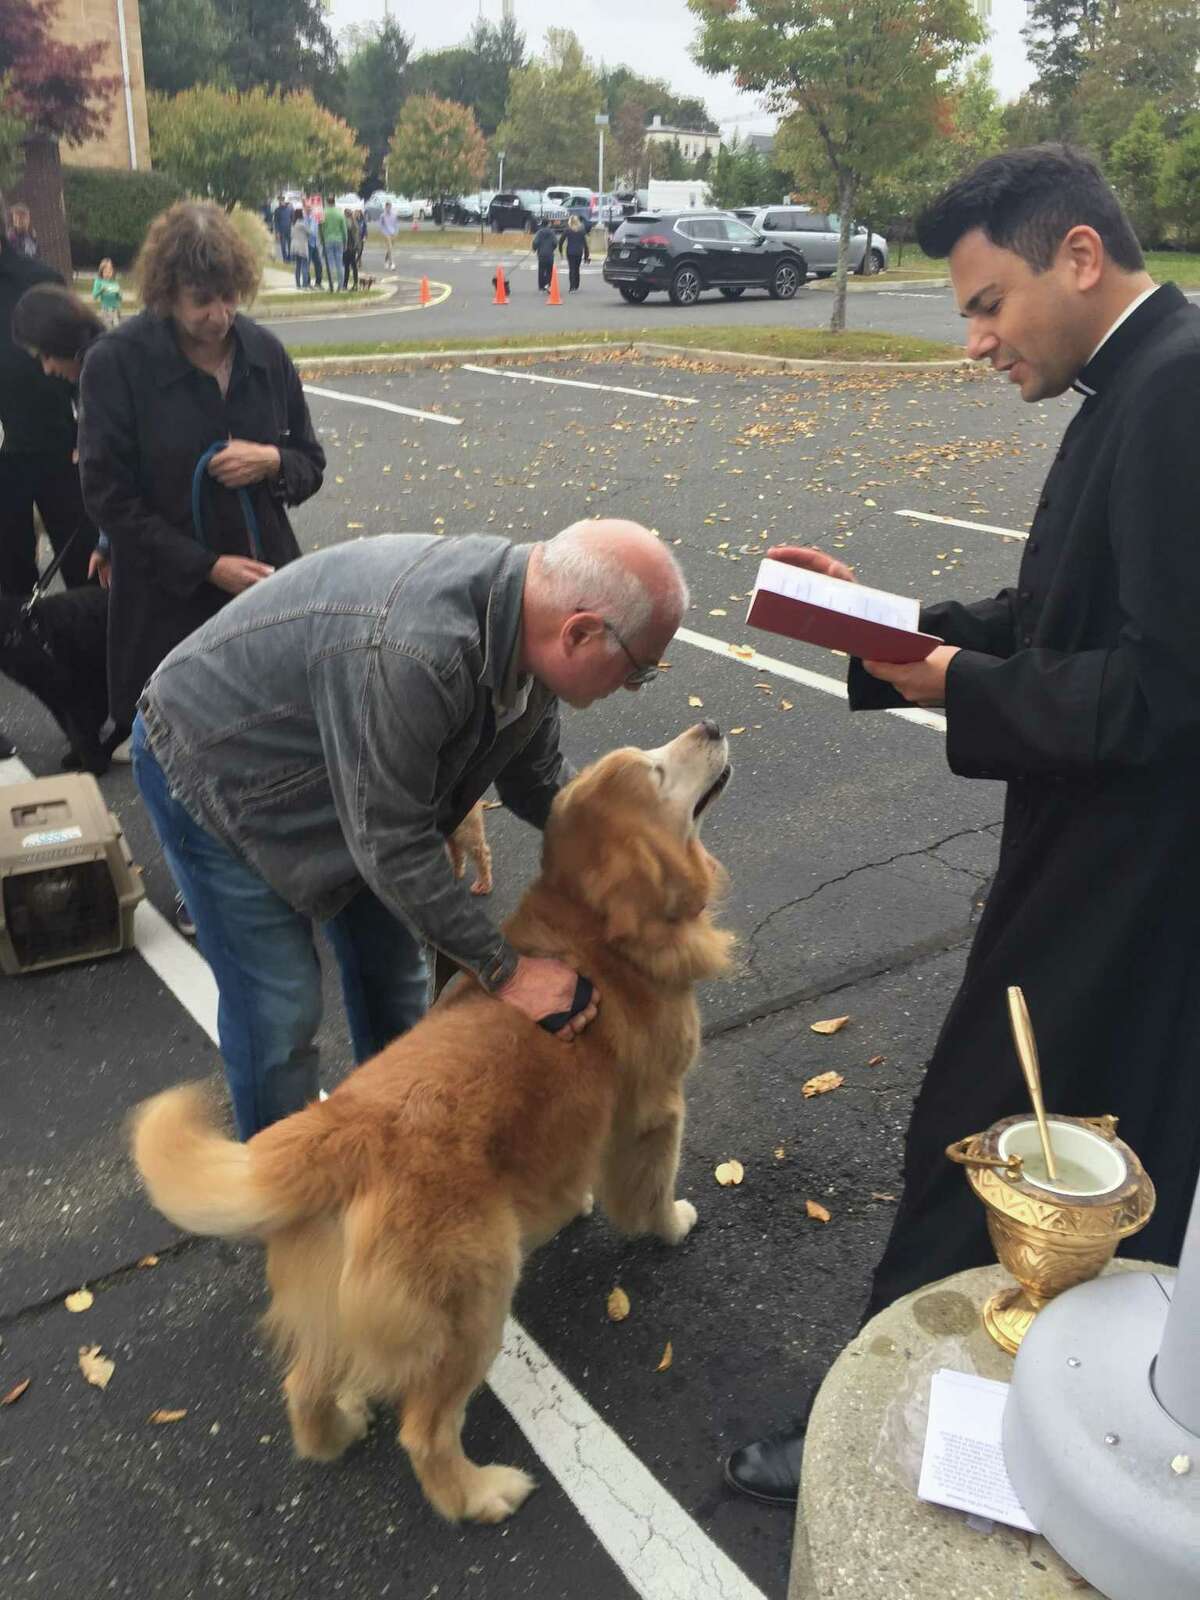 St. Mary’s new priest, Fr. Damian Pielisz, blessing pets.